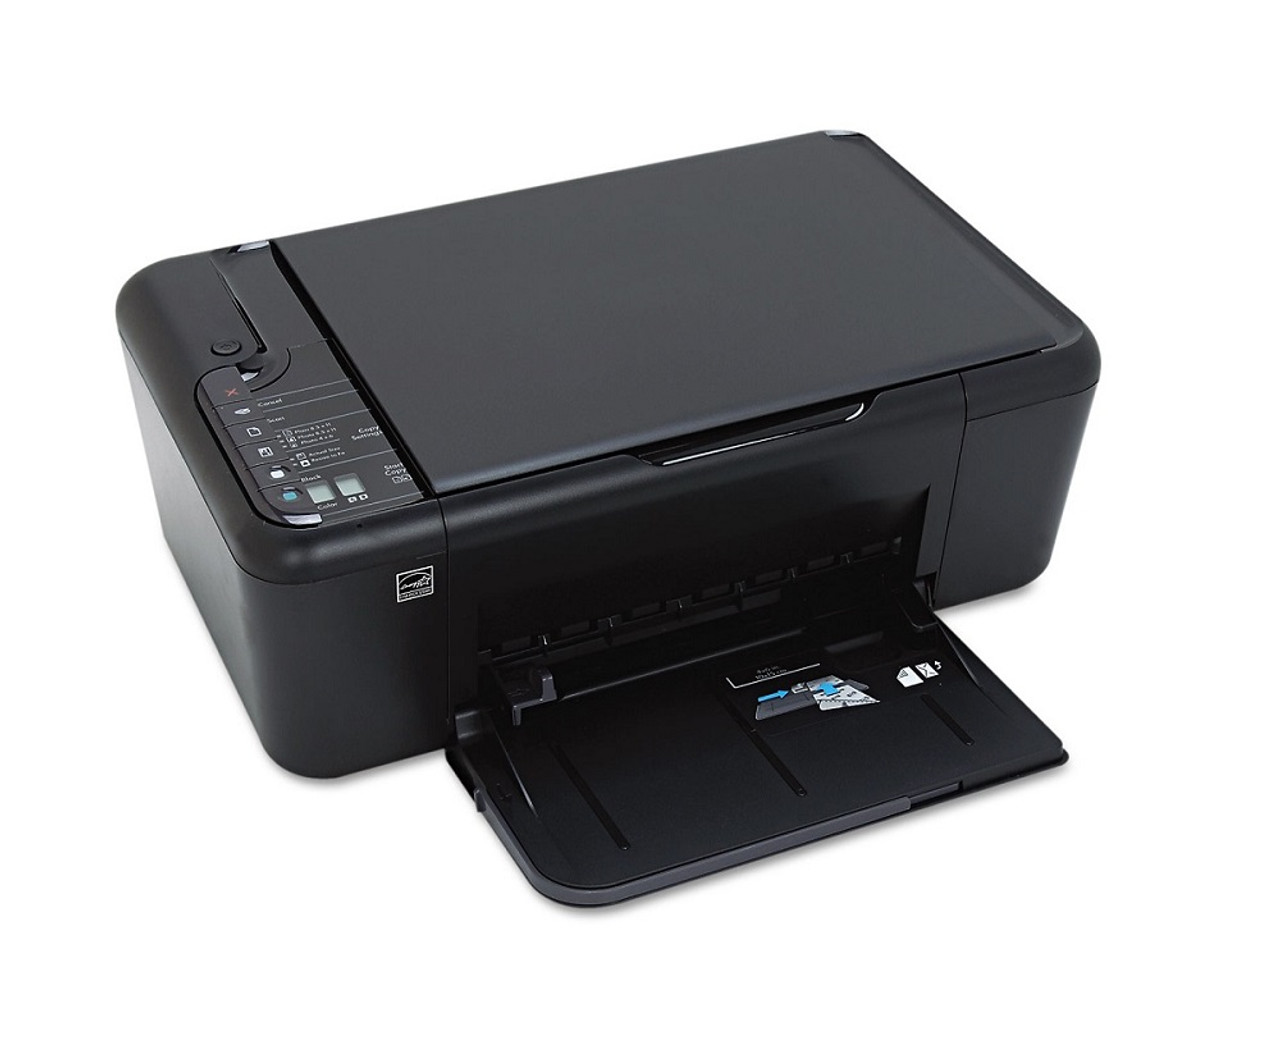 KY303 - Dell Scan Fax Copy All-In-One Printer 4429-0D2 Printer 948 (Refurbished)